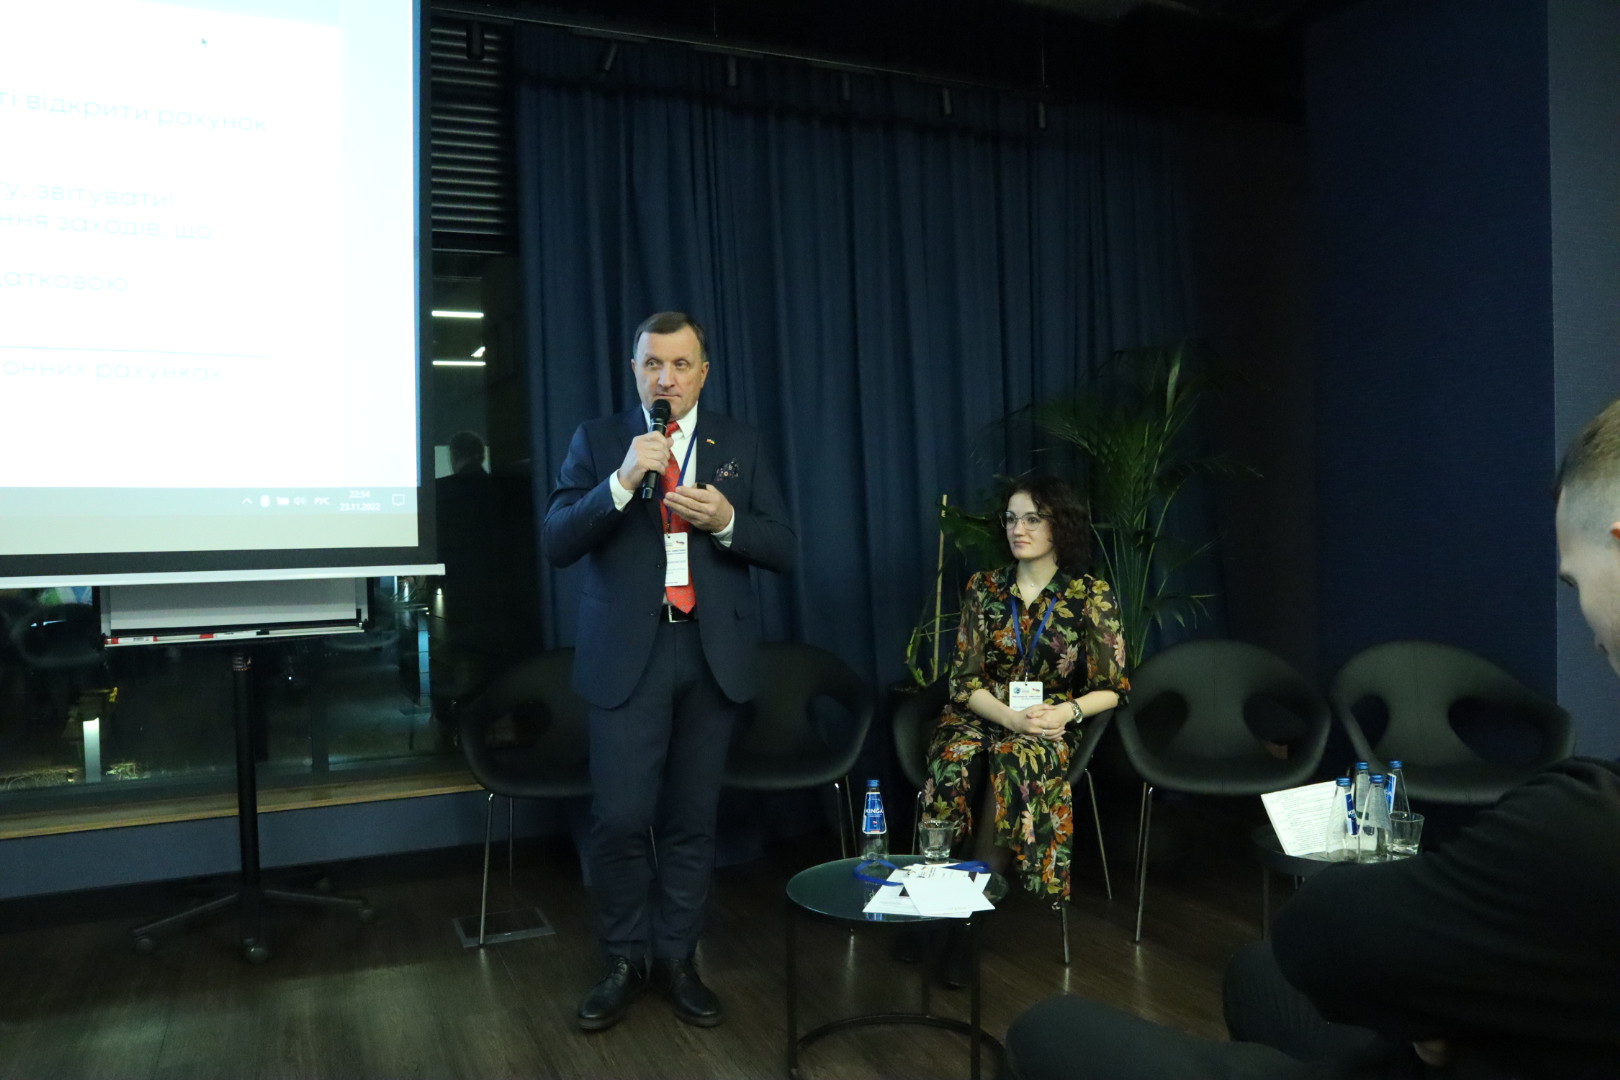 The state of the real estate market in Poland, investments, business contacts and new markets: Yaroslav Romanchuk and Inga Livandovska were the speakers of the conference „Real Estate and Investments in Poland“ by BBN